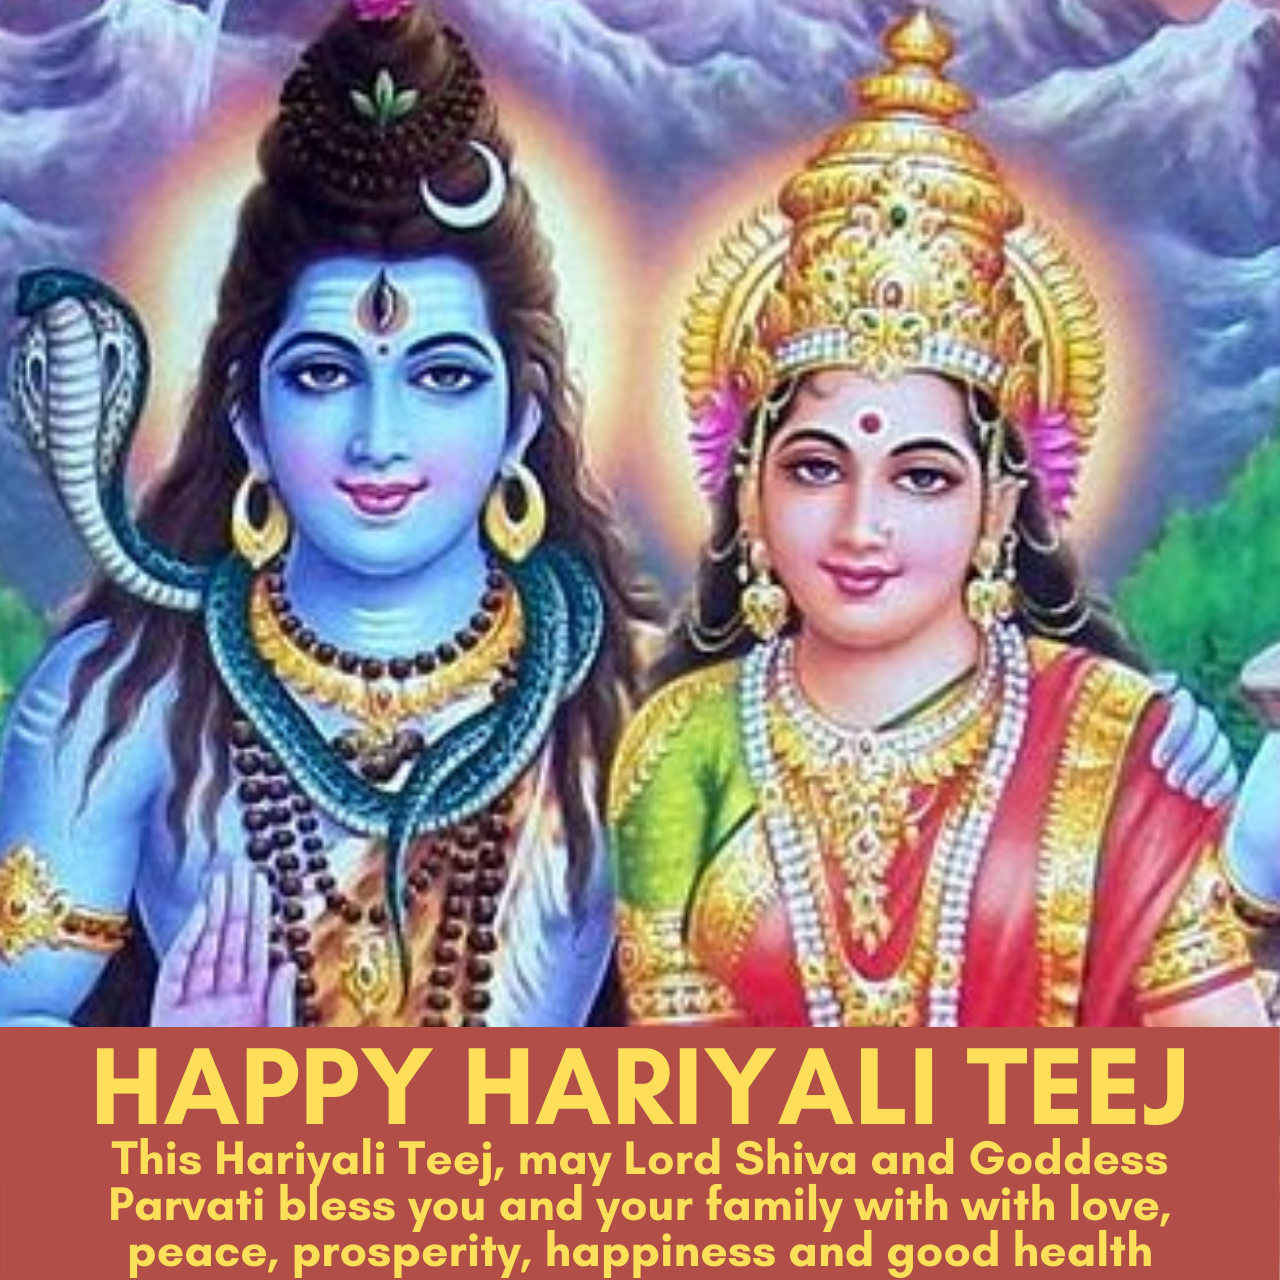 Hariyali Teej 2021 Wishes, Quotes, Greetings, Messages, HD Images, Wallpaper,  and Status to Share